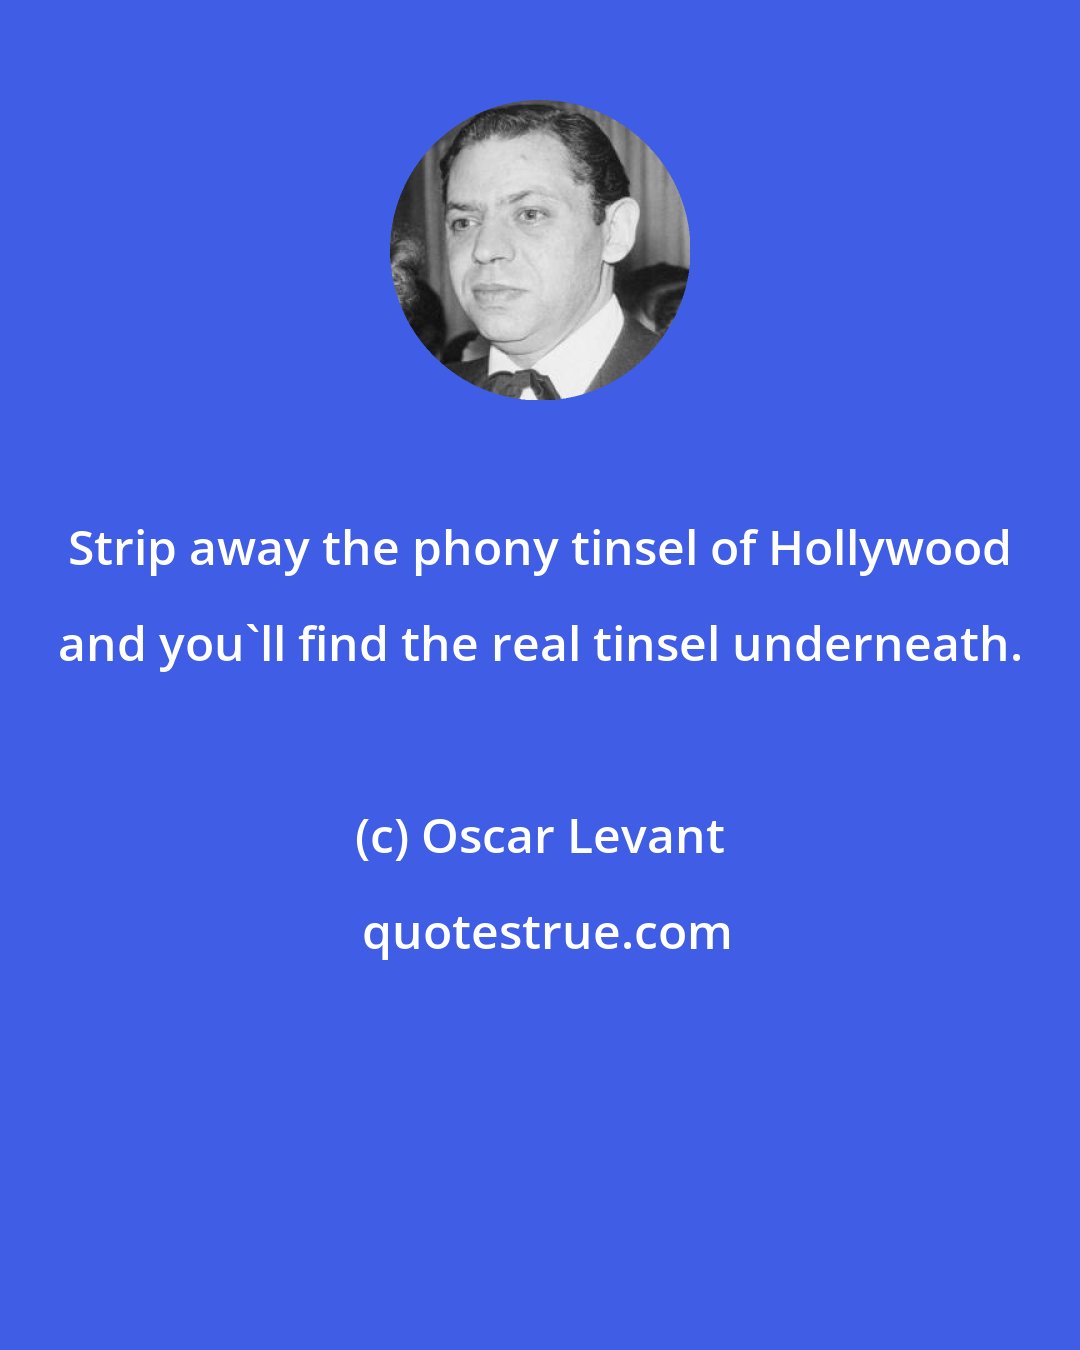 Oscar Levant: Strip away the phony tinsel of Hollywood and you'll find the real tinsel underneath.